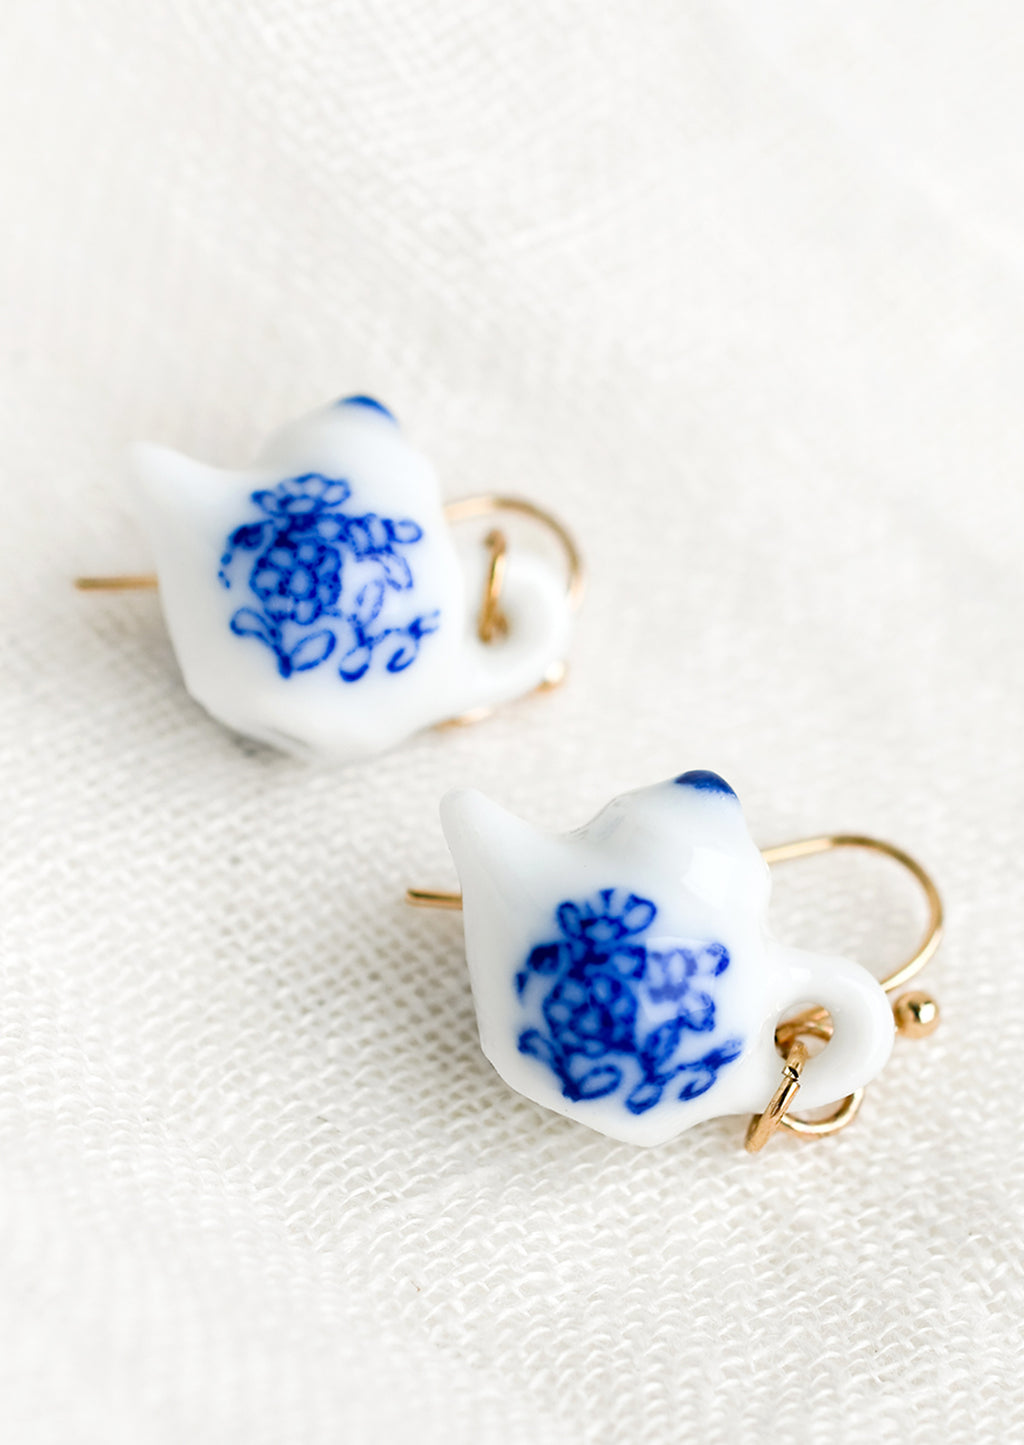 1: A pair of earrings in shape of white teapot with blue floral print.